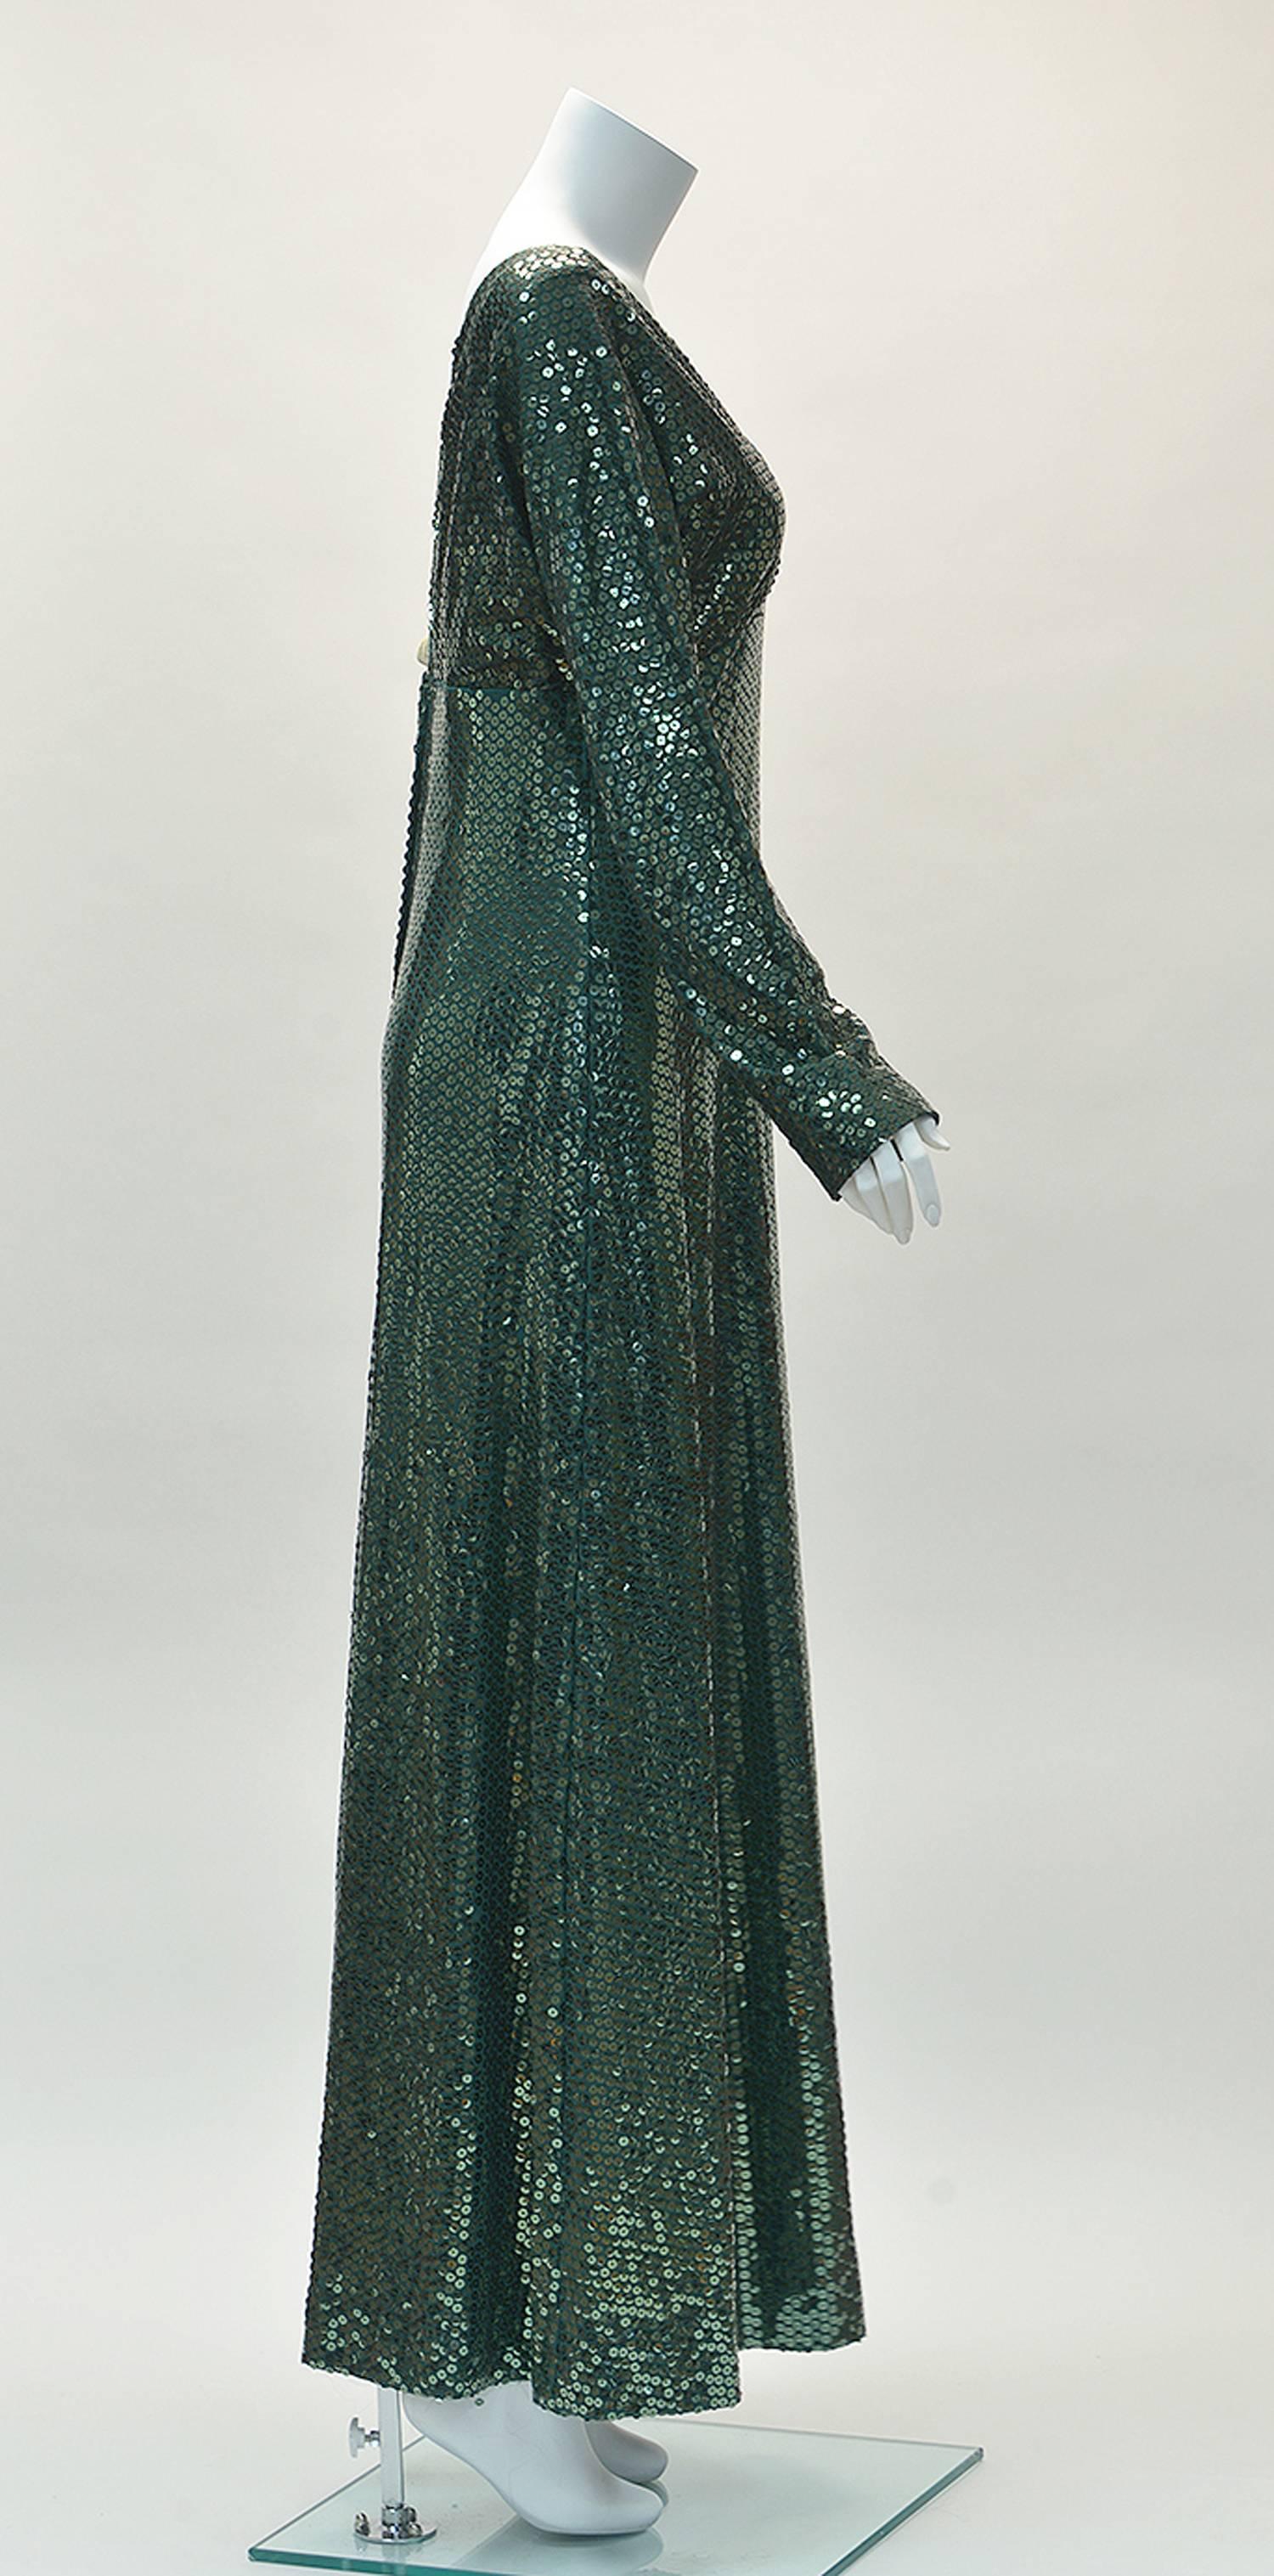 Kiki Hart was a designer in the 1960's who designed upscale garments. 
Her New York based design house was known for extremely detailed craftsmanship and high end fabrics.
 
This long green sequin knit dress twinkles in all the right places! Dress